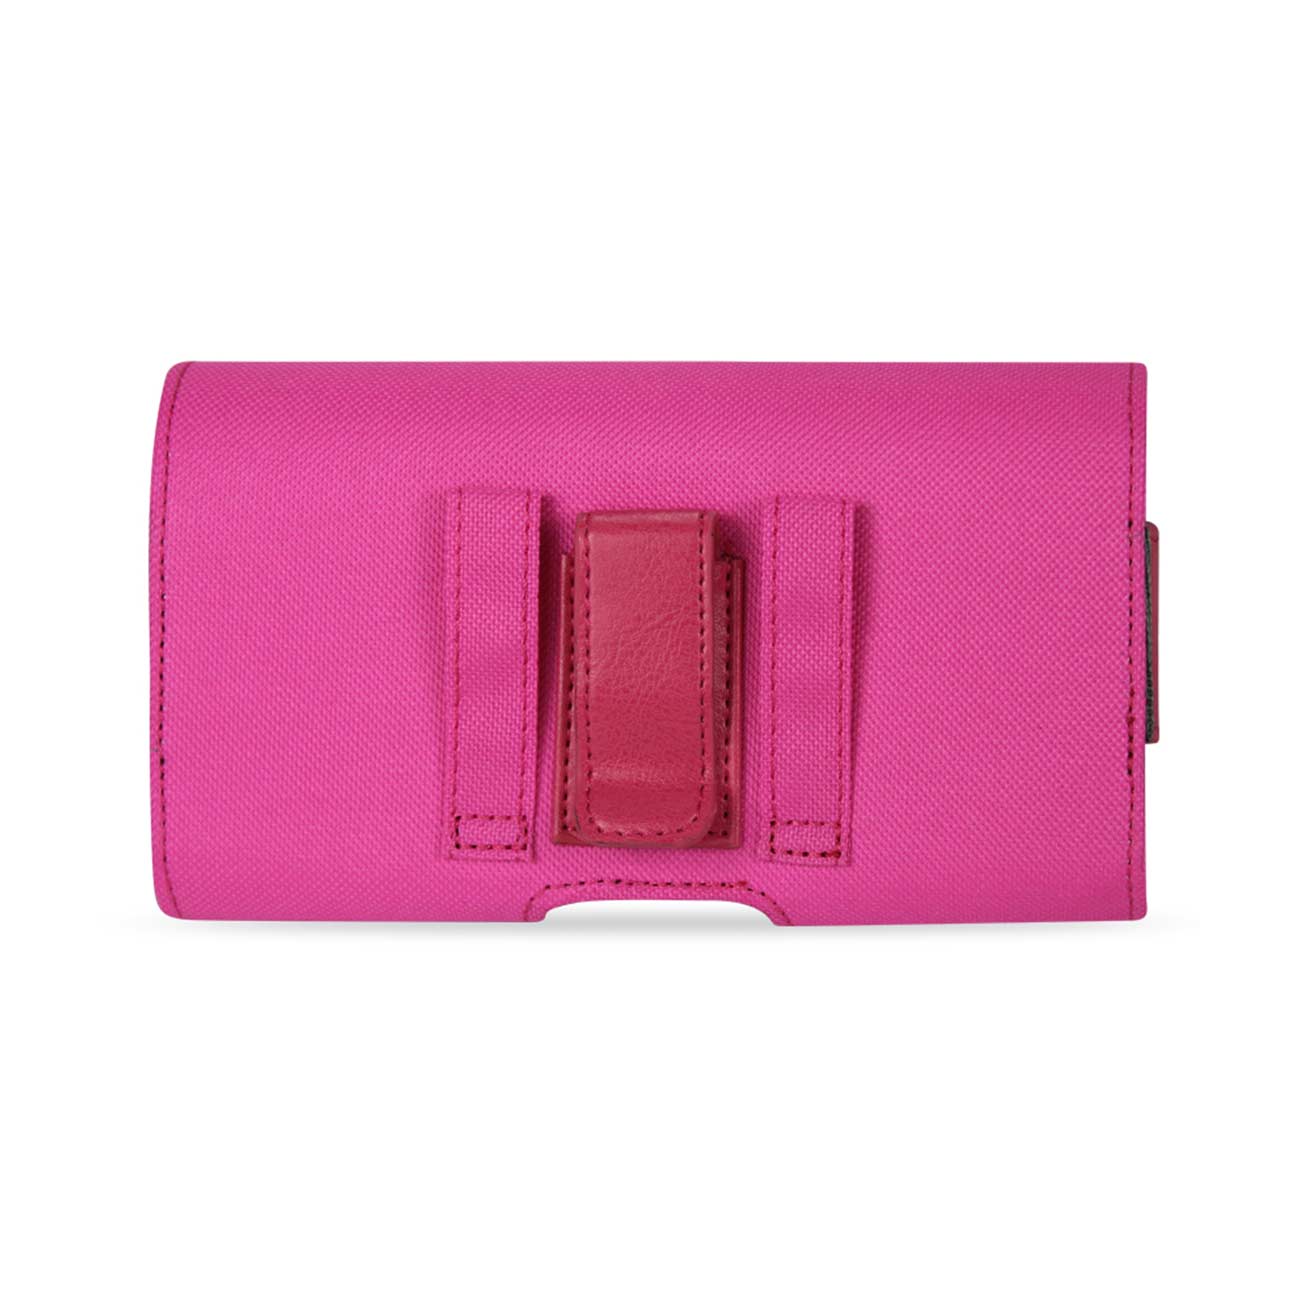 Horizontal Rugged Pouch/Phone Holster With Z Lid Pattern In Hot Pink